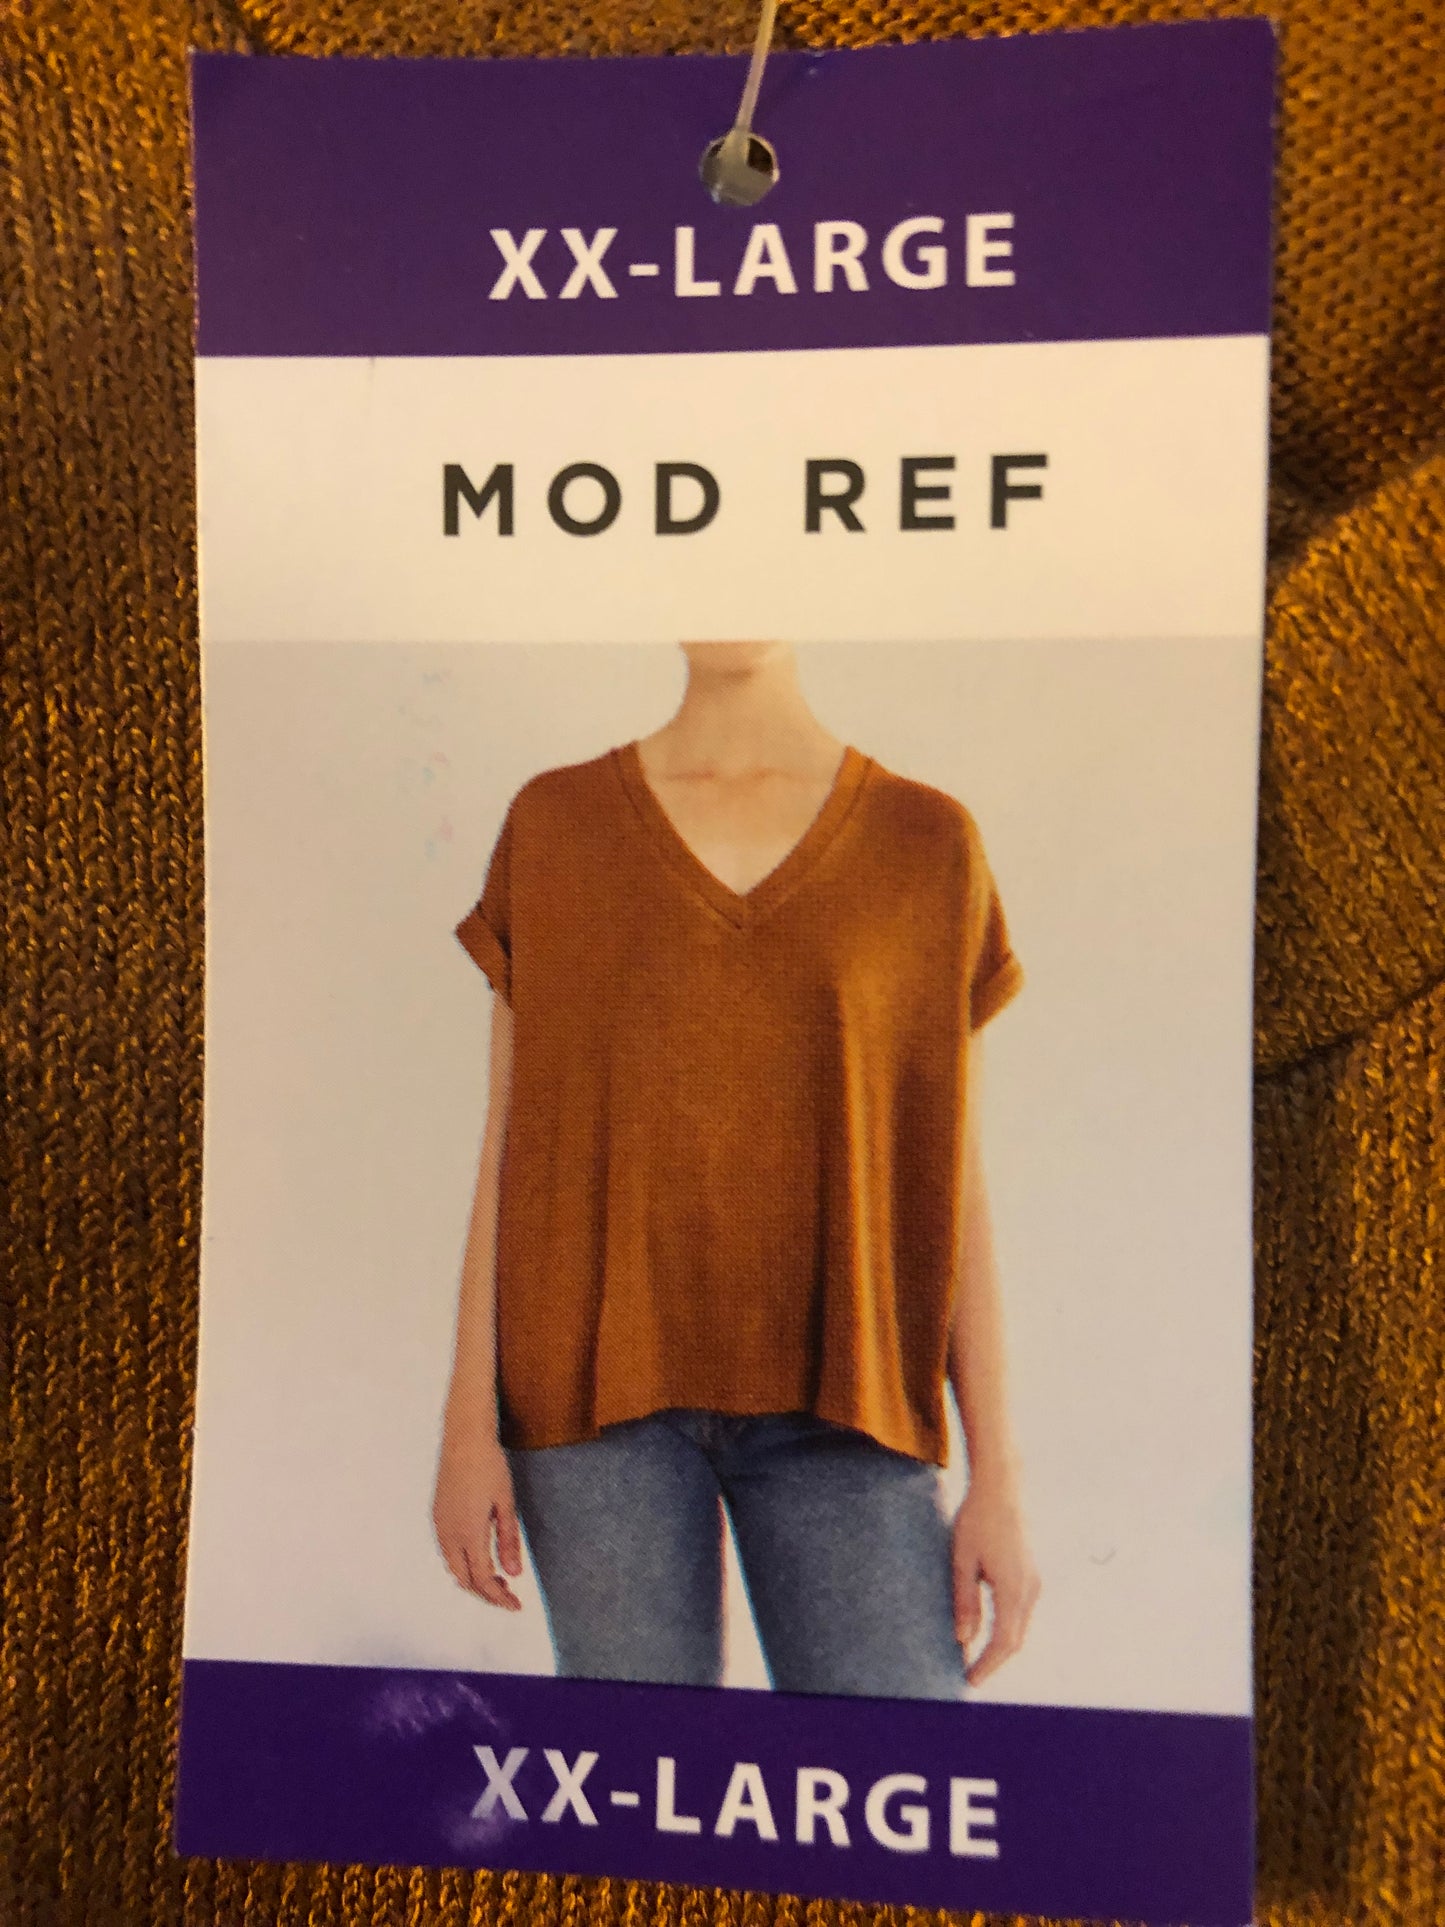 NWT Mod Ref Lightweight Shirt V Neck Your Choice of Color and Size